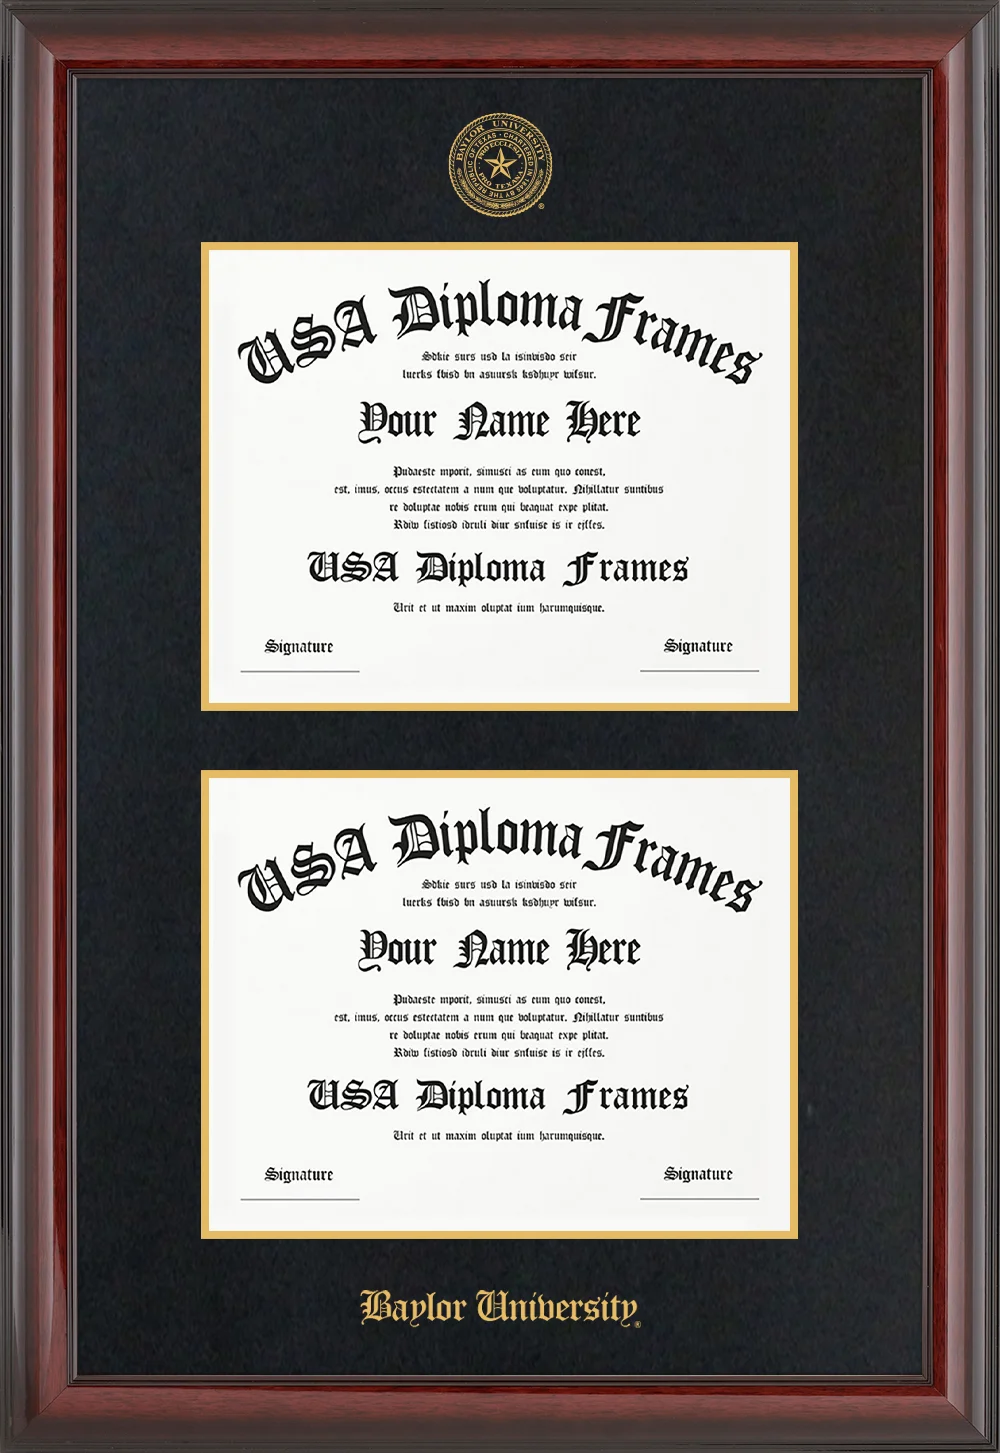 Double Document - Cherry Mahogany Glossy Moulding - Black Suede Mat - Gold Accent Mat - Baylor University Embossing Diploma Frame